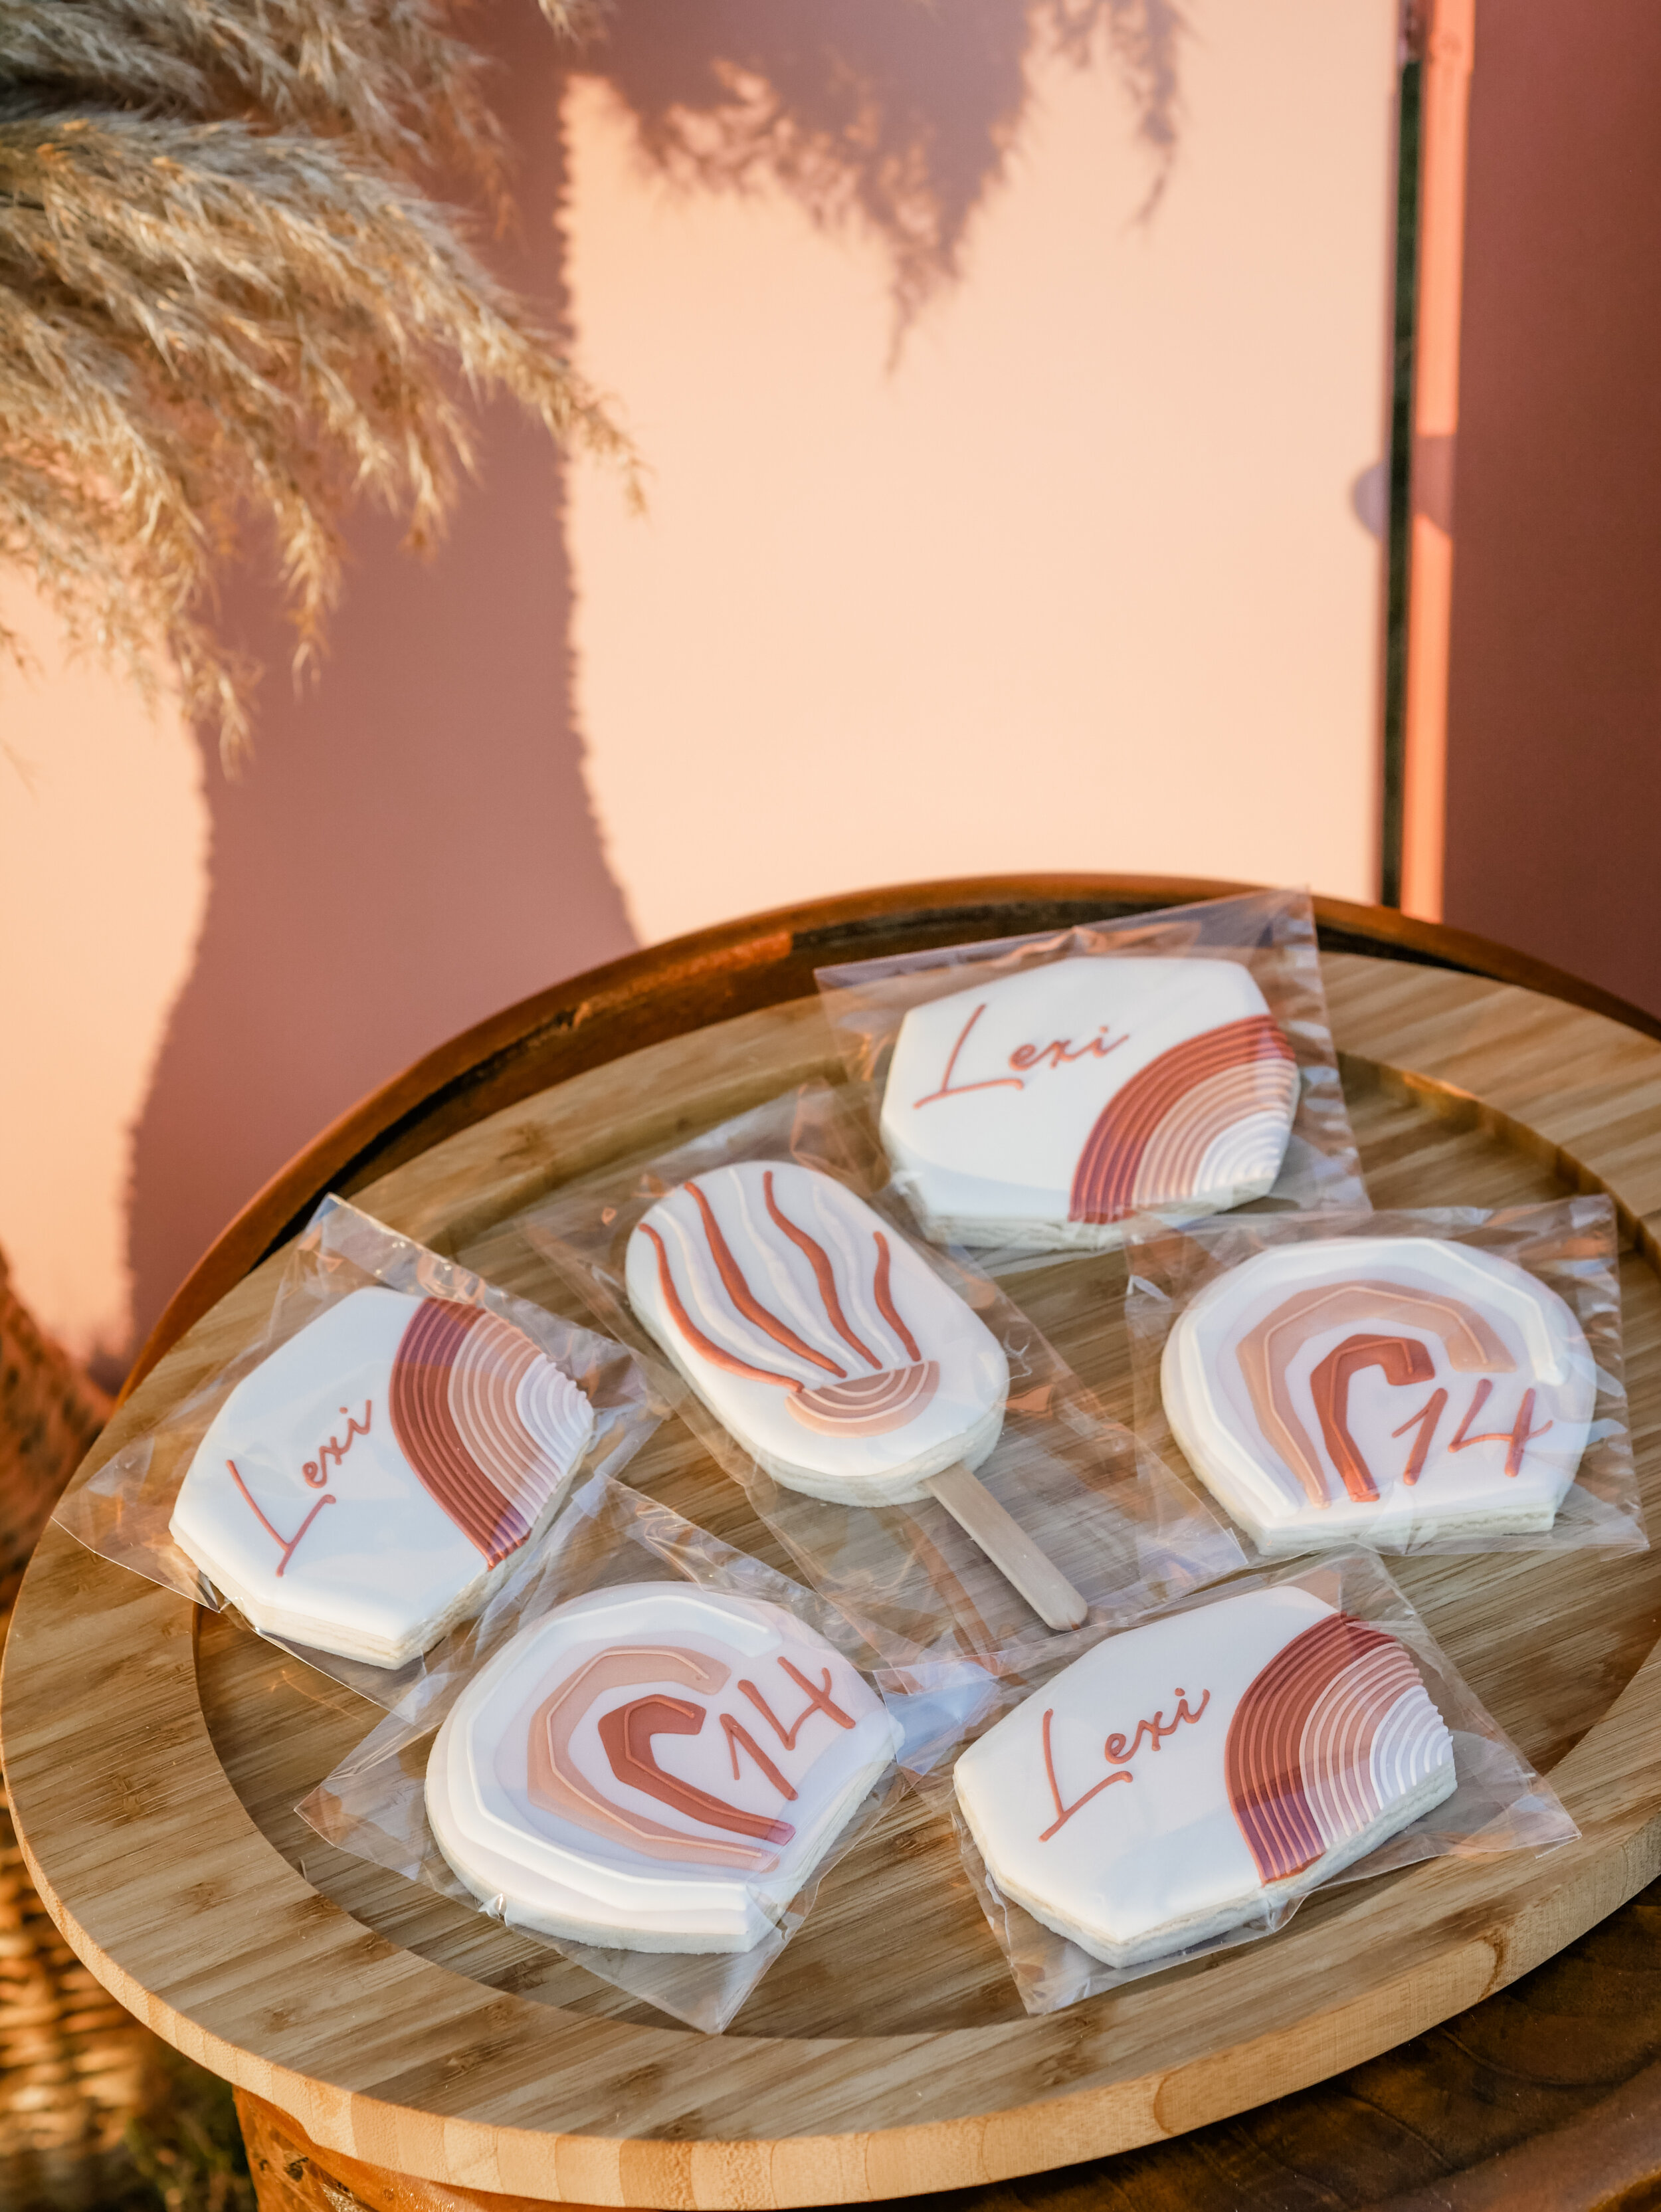  Boho Chic Muted Rainbow Cookies for a luxury backyard Glamping experience - with large rentable tent and picnic area from MINT Event Design in Austin, TX! Perfect for teen slumber parties, birthday parties, or bachelorette parties. See how event des